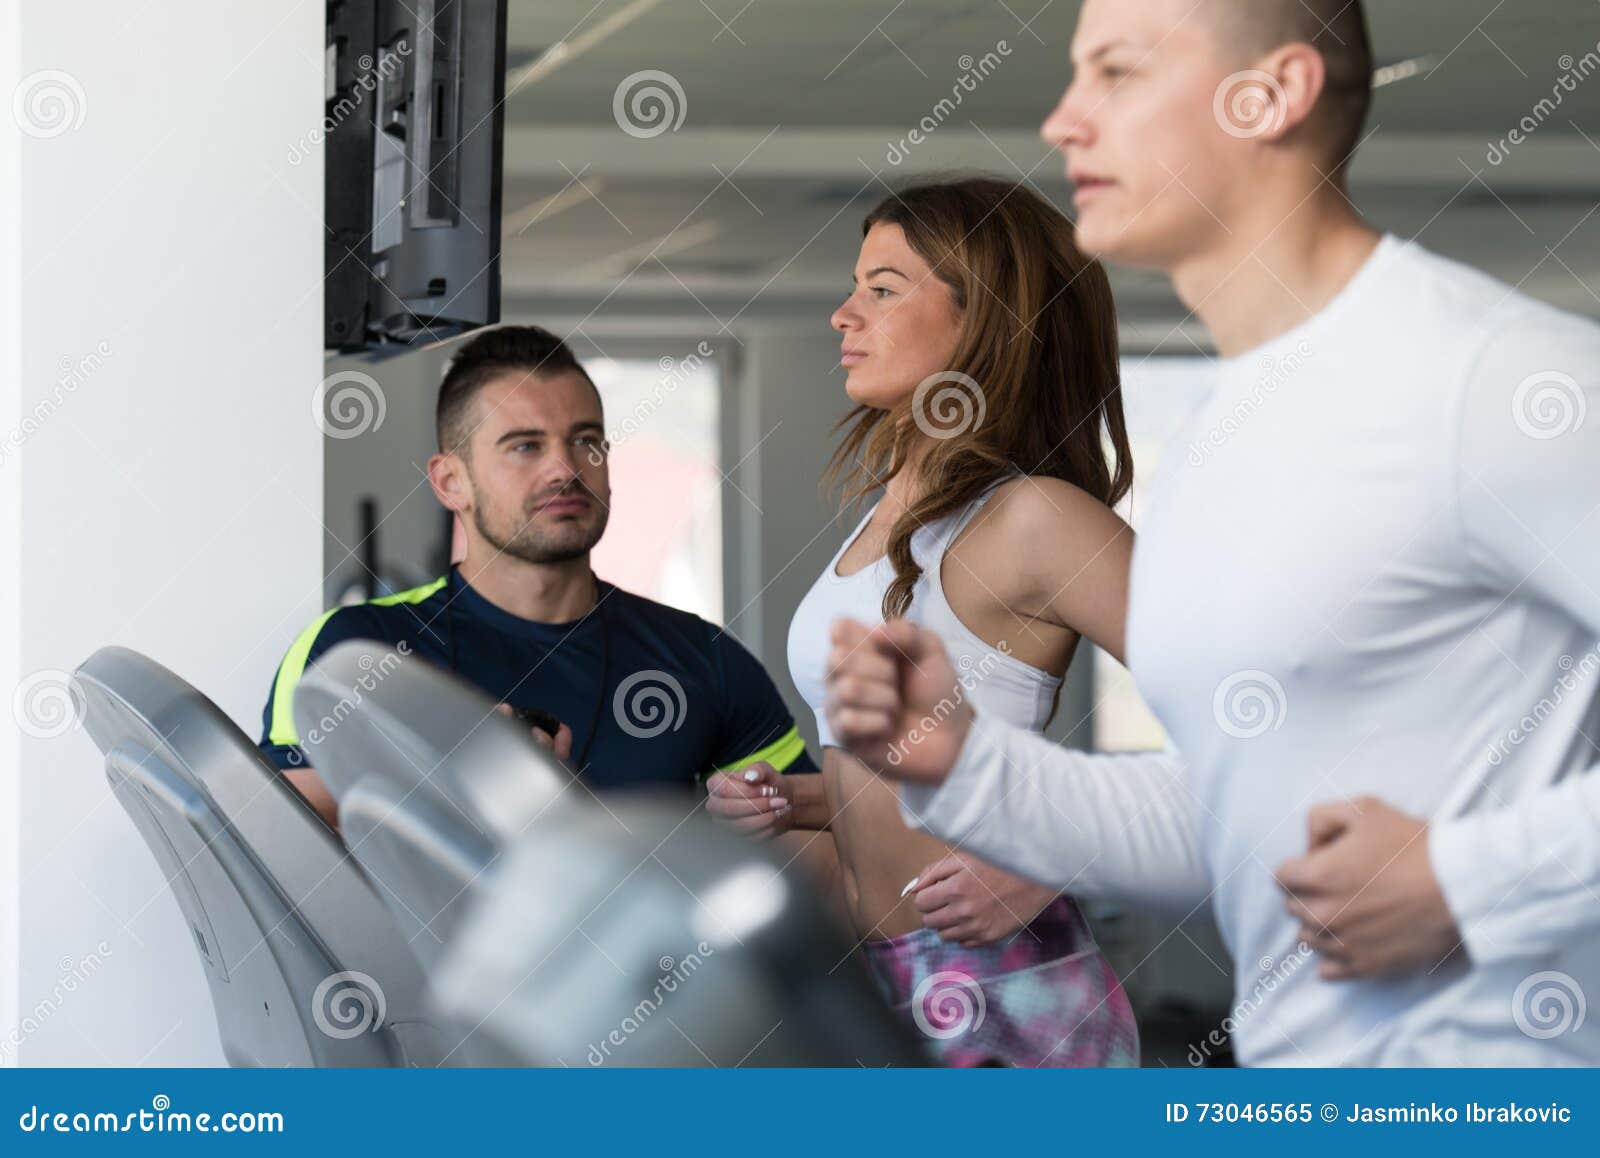 Personal Trainer And Client In Gym On Treadmills Stock Image Image Of